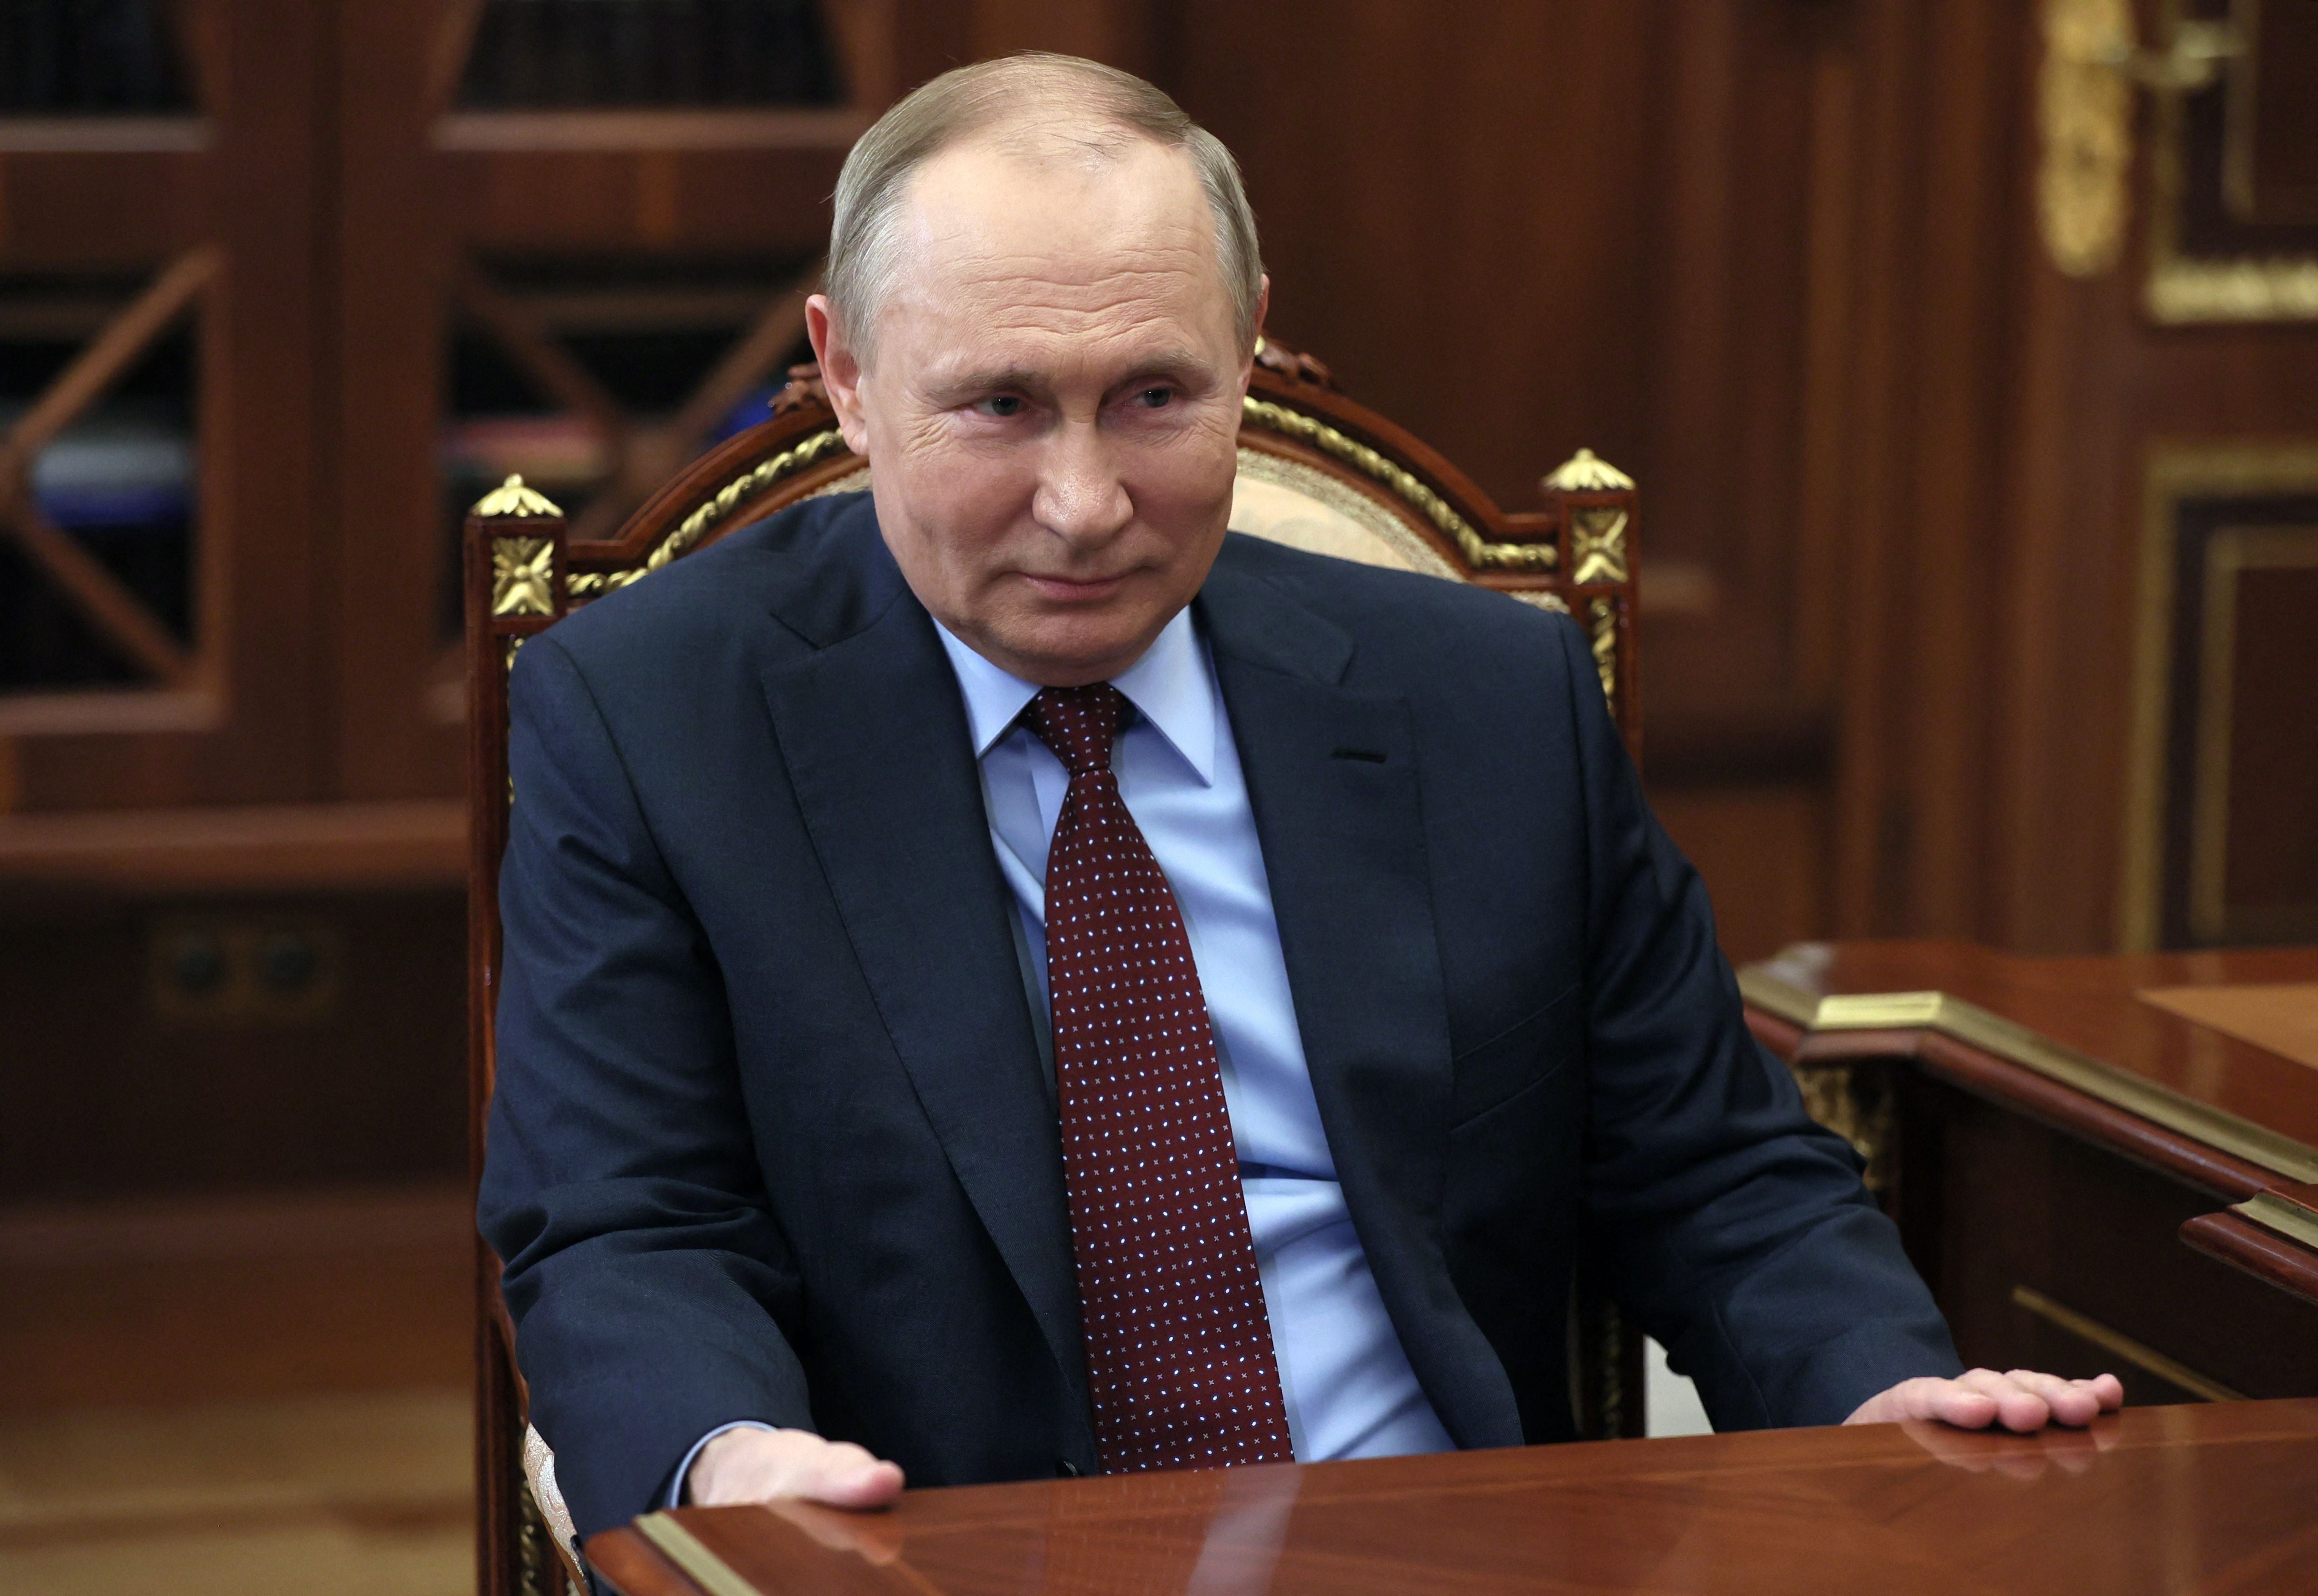 Russian President Vladimir Putin attends a meeting at the Kremlin in Moscow, 2 March 2022